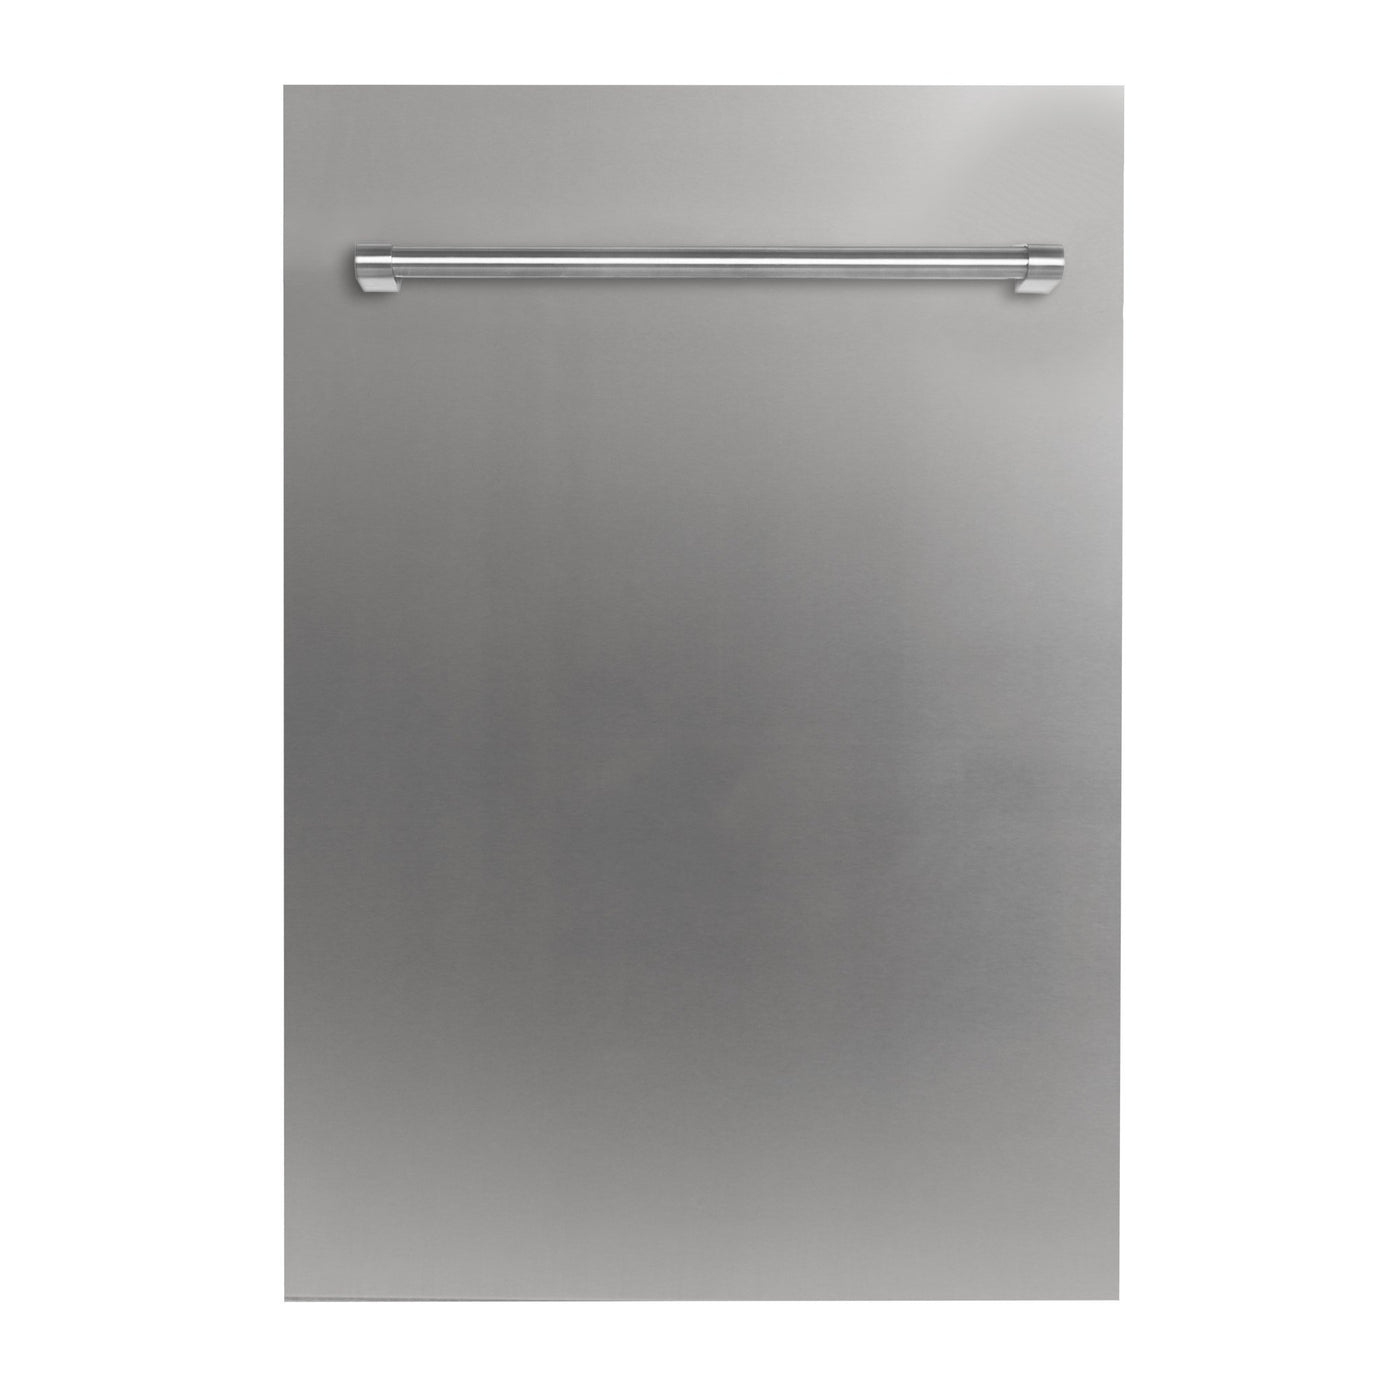 ZLINE Kitchen and Bath, ZLINE 18" Top Control Dishwasher in Custom Panel Ready with Stainless Steel Tub, DW-304-H-18, ZLINE 18 in. Top Control Built-In Dishwasher - Custom Panel Ready  | Rustic Kitchen and Bath